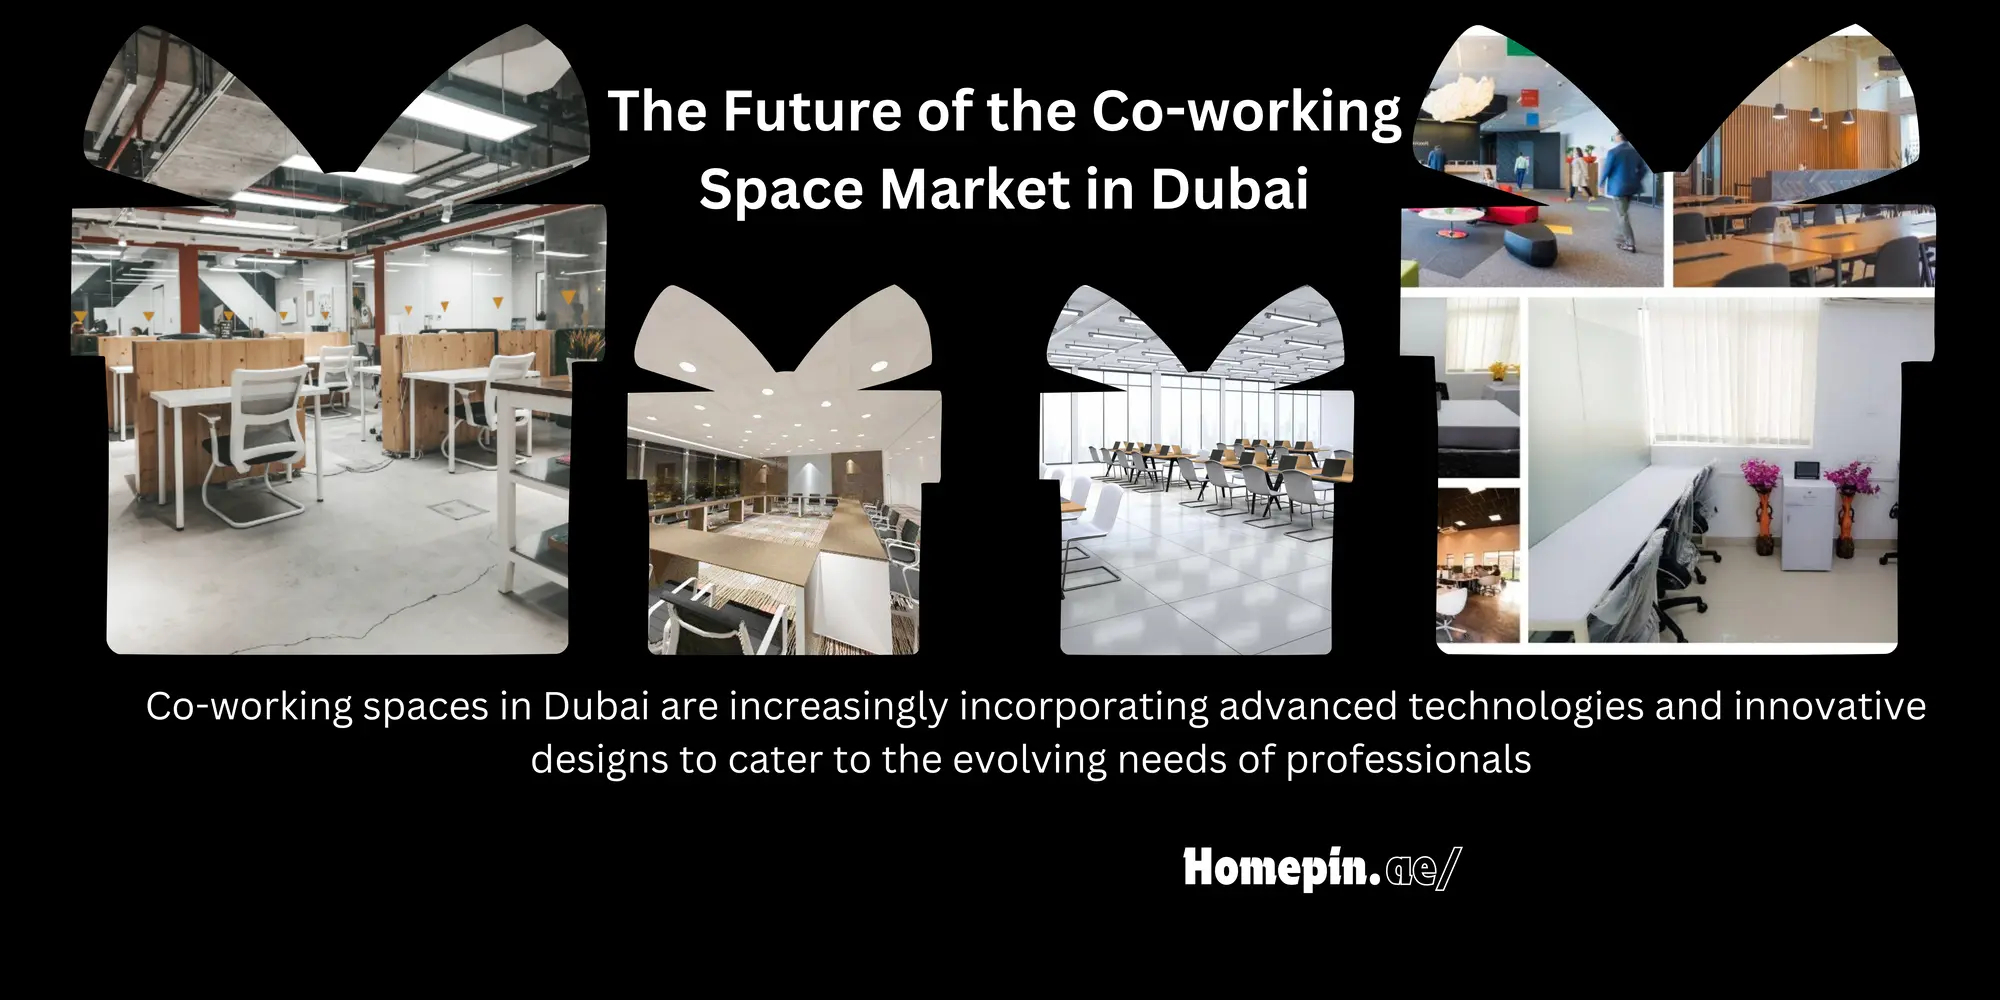 Co-working Spaces in Dubai